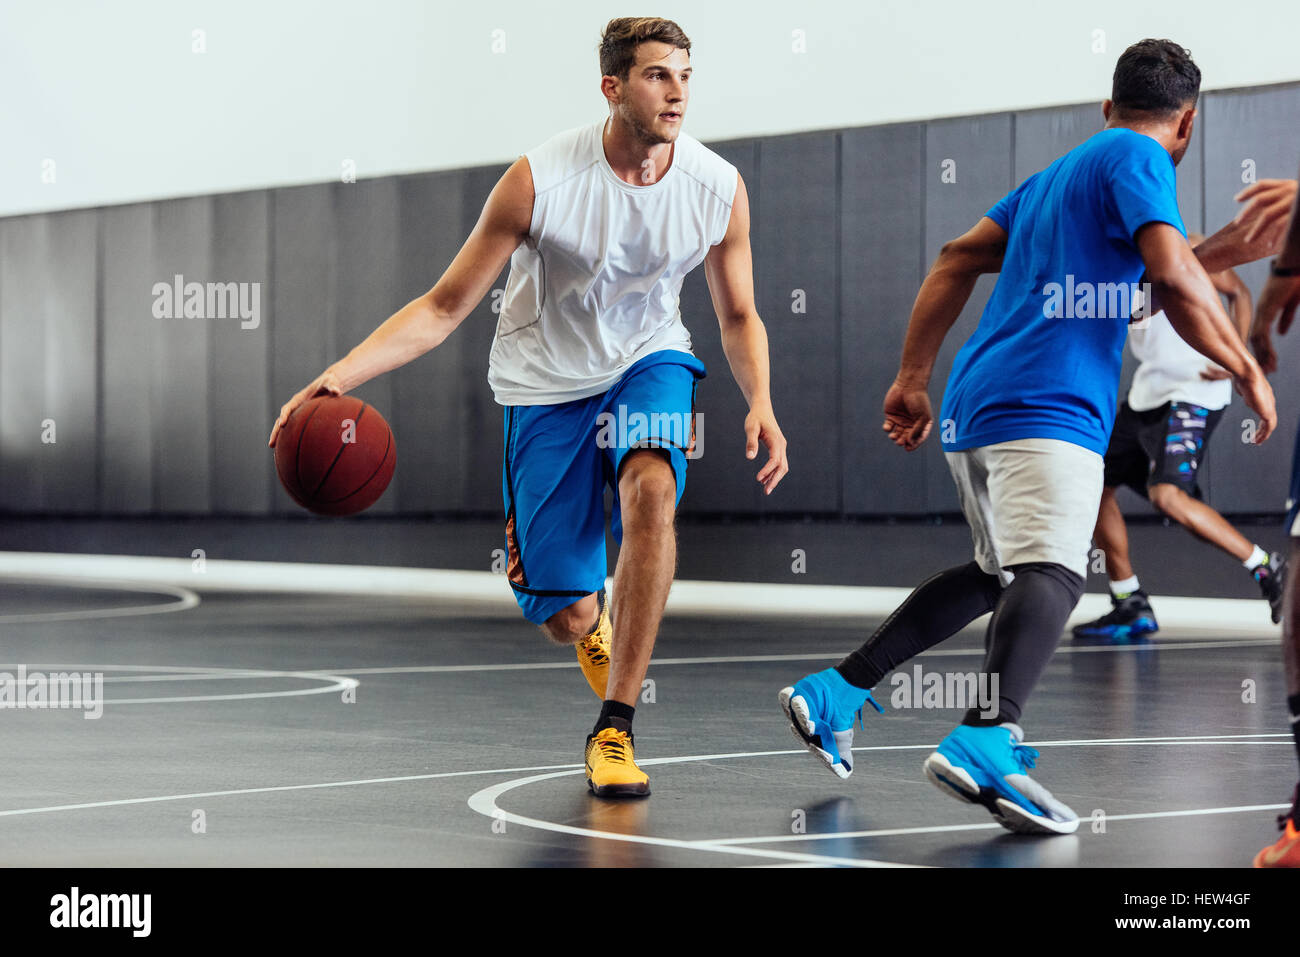 Male basketball player running with ball in basketball game Stock Photo